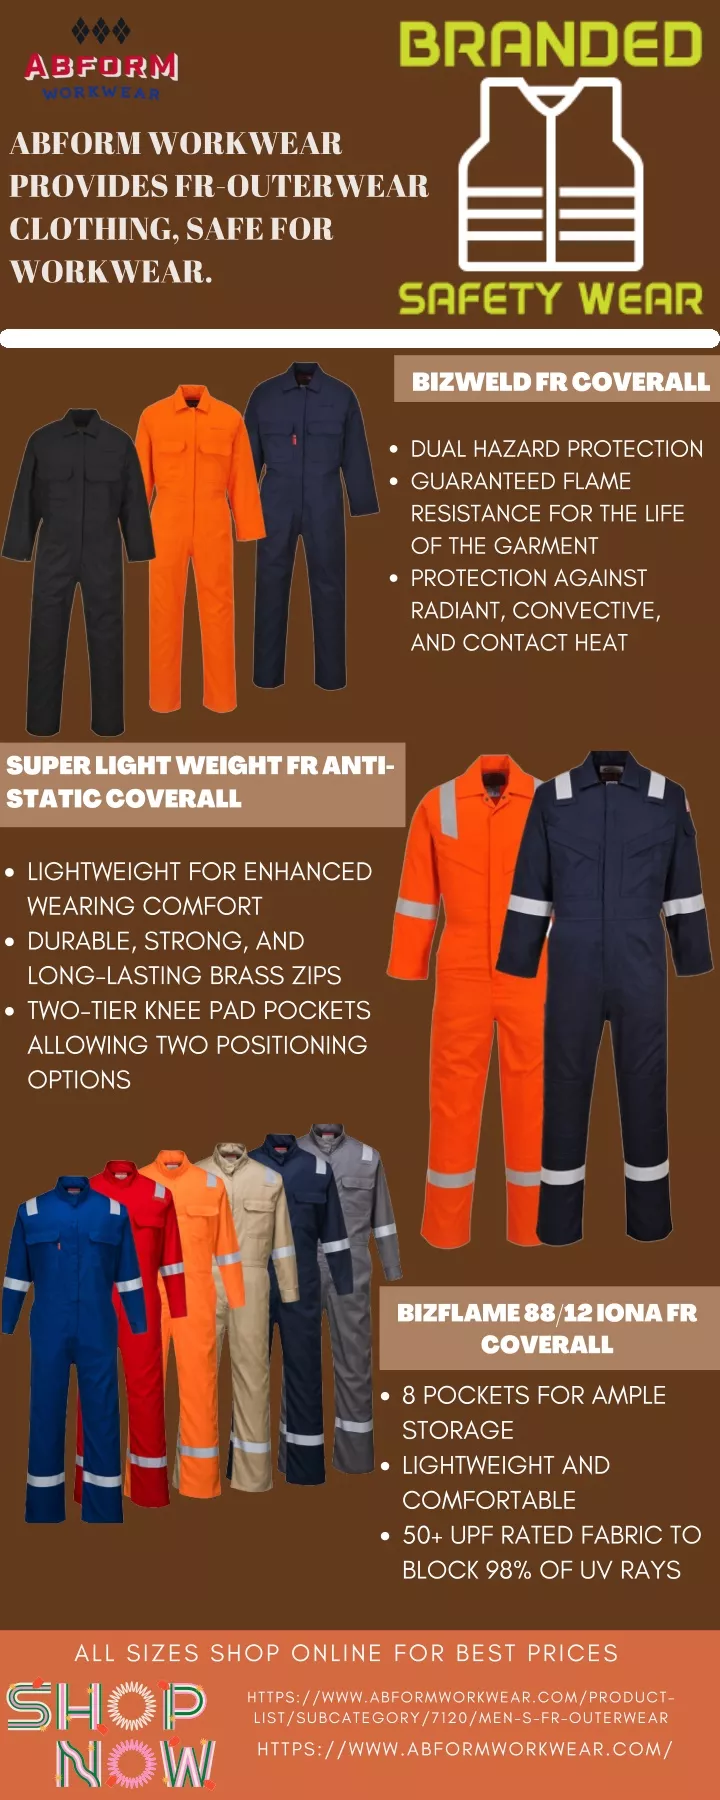 abform workwear provides fr outerwear clothing